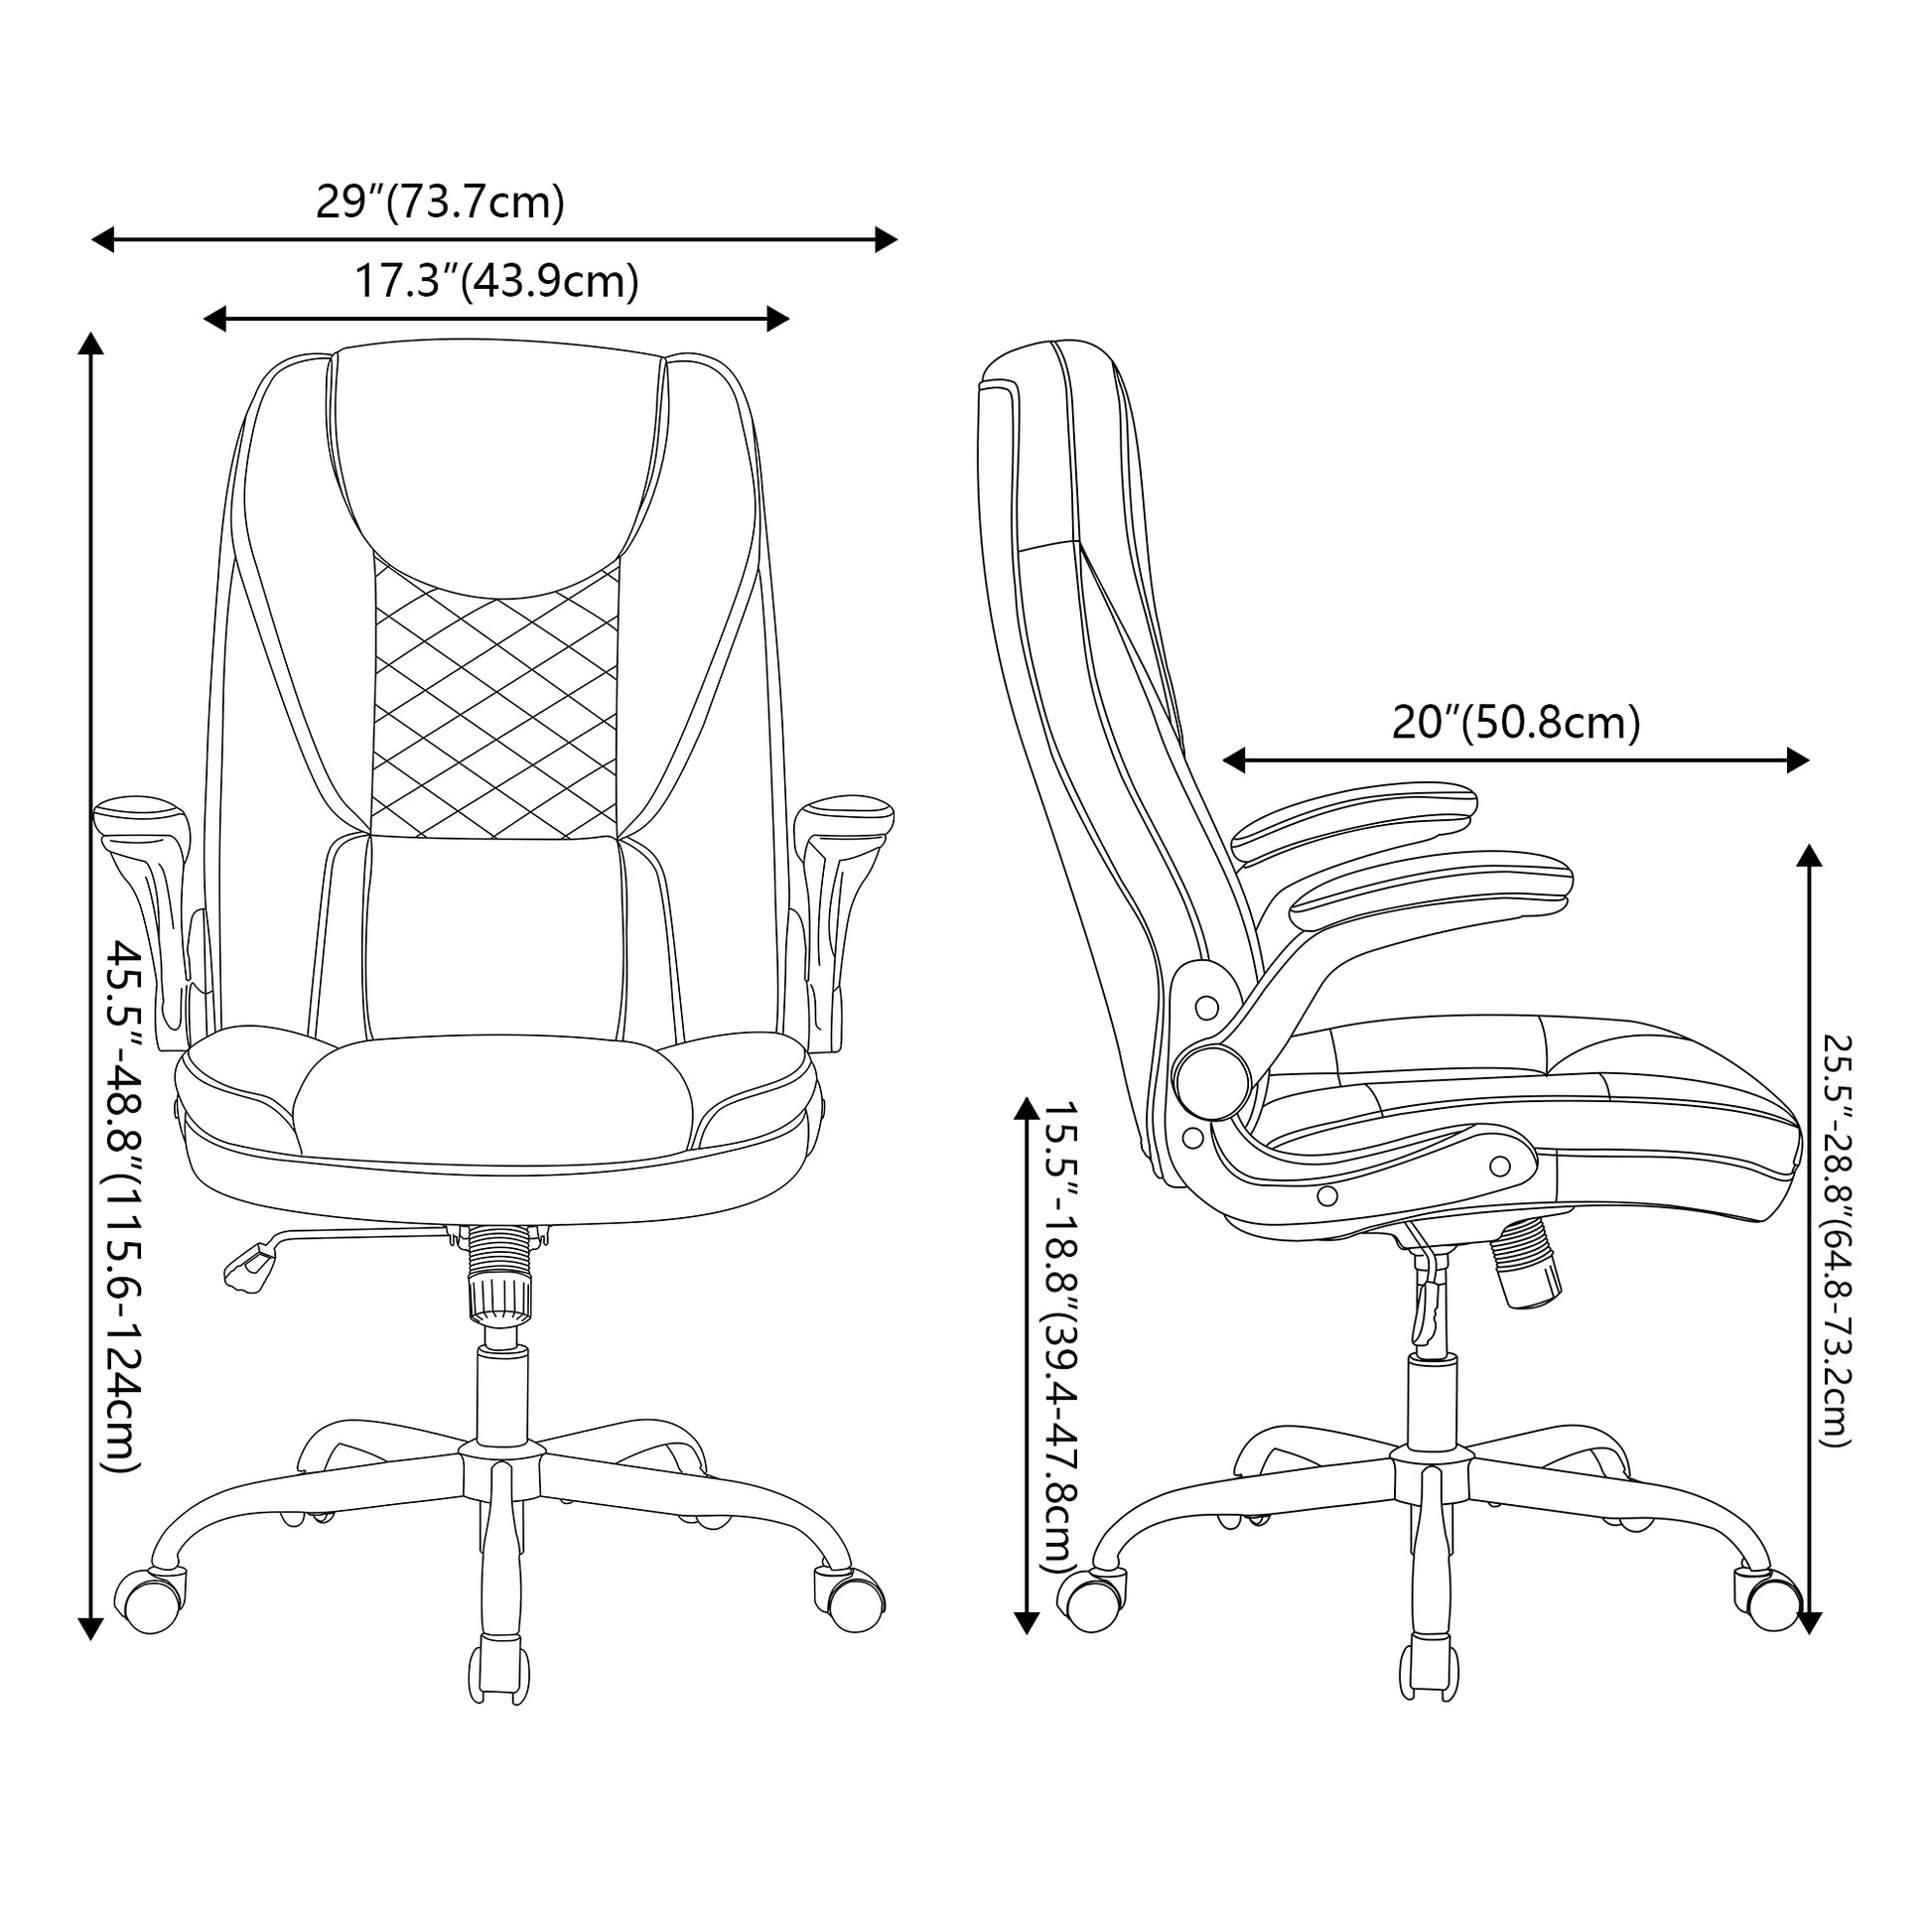 Ergonomic Leather Office Chair With Lumbar Support